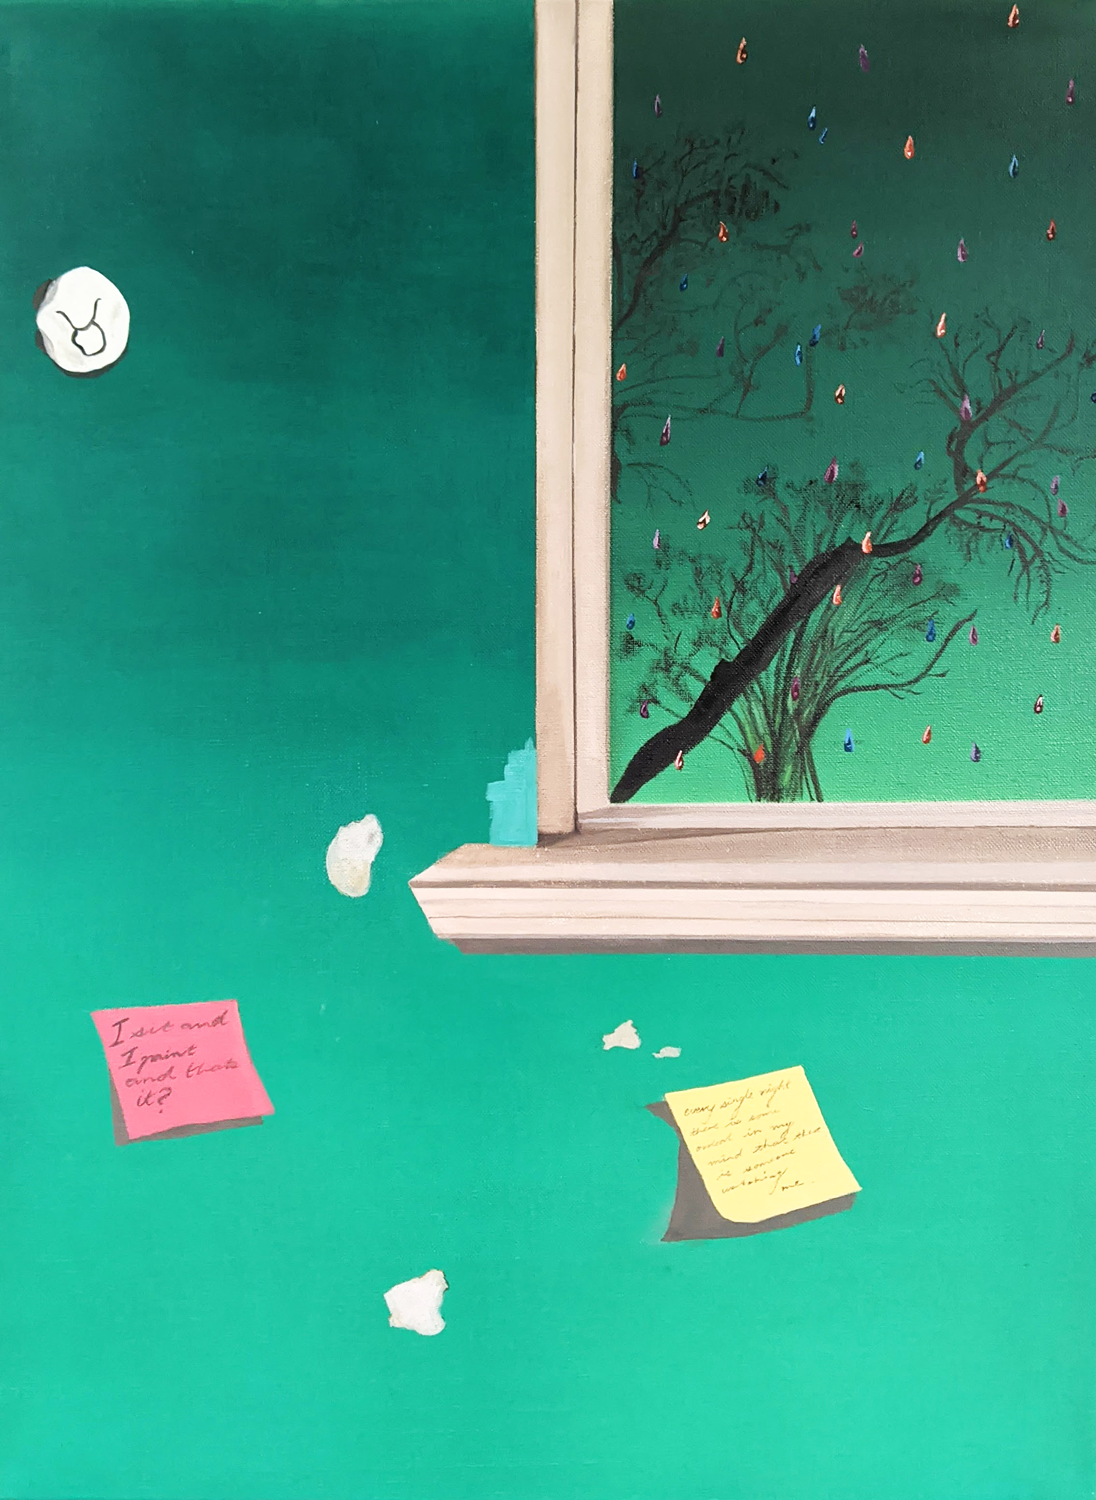 An image of a domestic scene, ruined wall with sticky notes with transcribed inner monologues, looking out through a window 